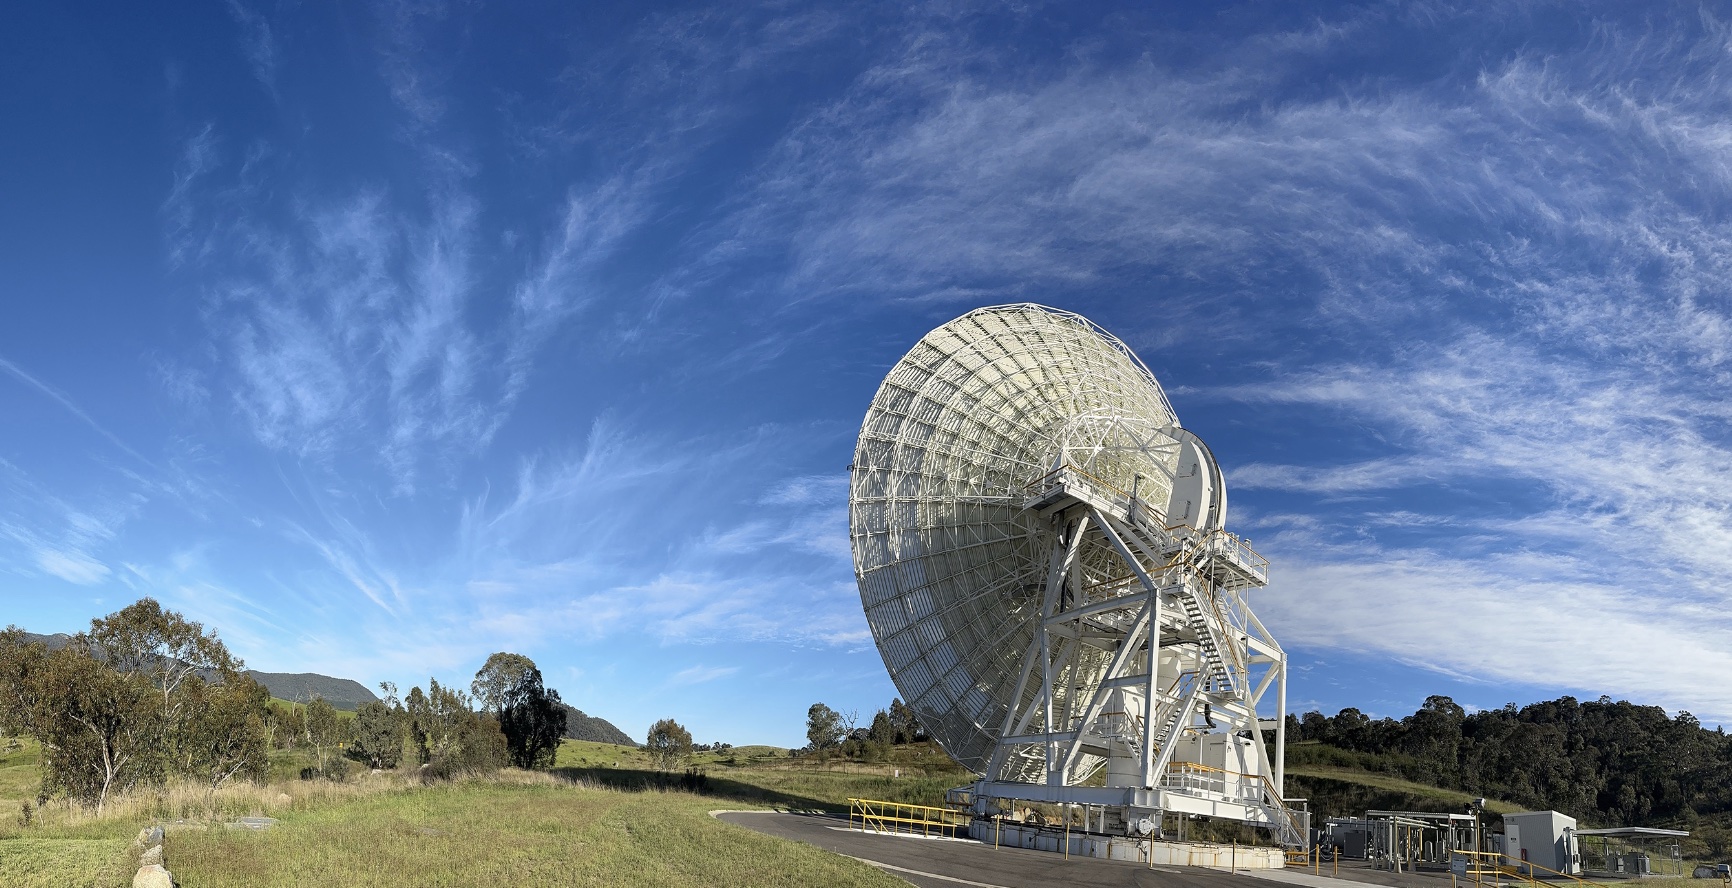 The Deep Space Station 36 antenna at the Canberra Deep Space Communication Complex, pointing at the horizon.